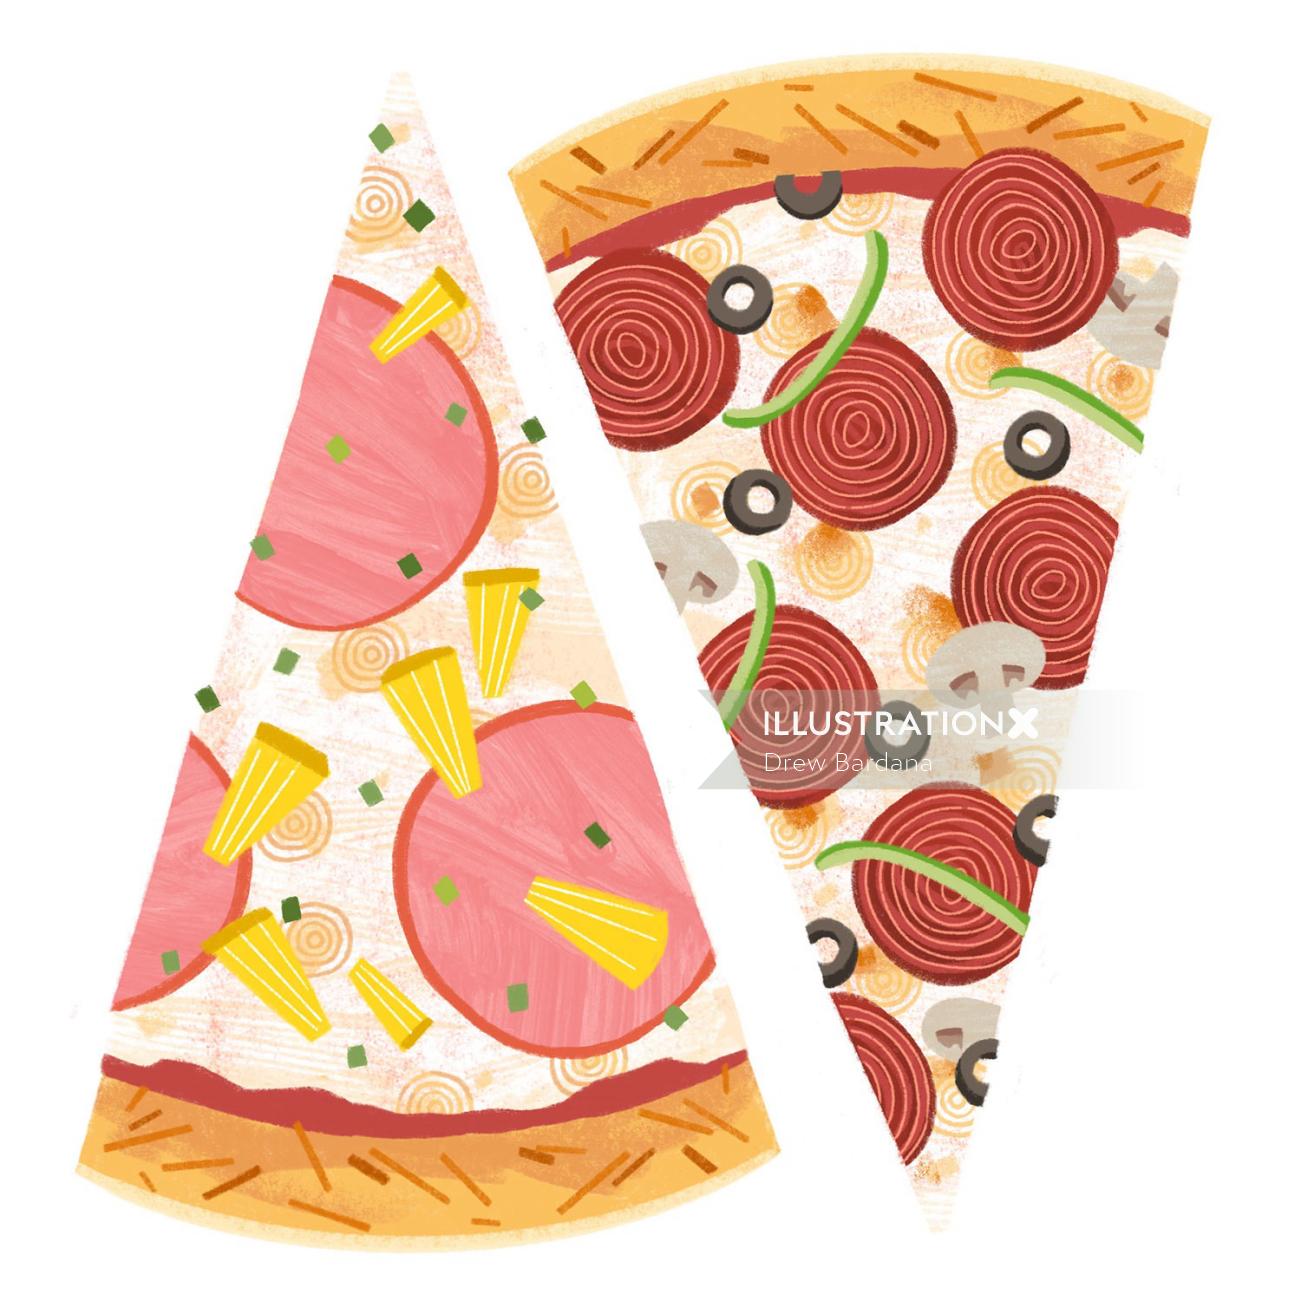 Two slices of pizza food illustration 